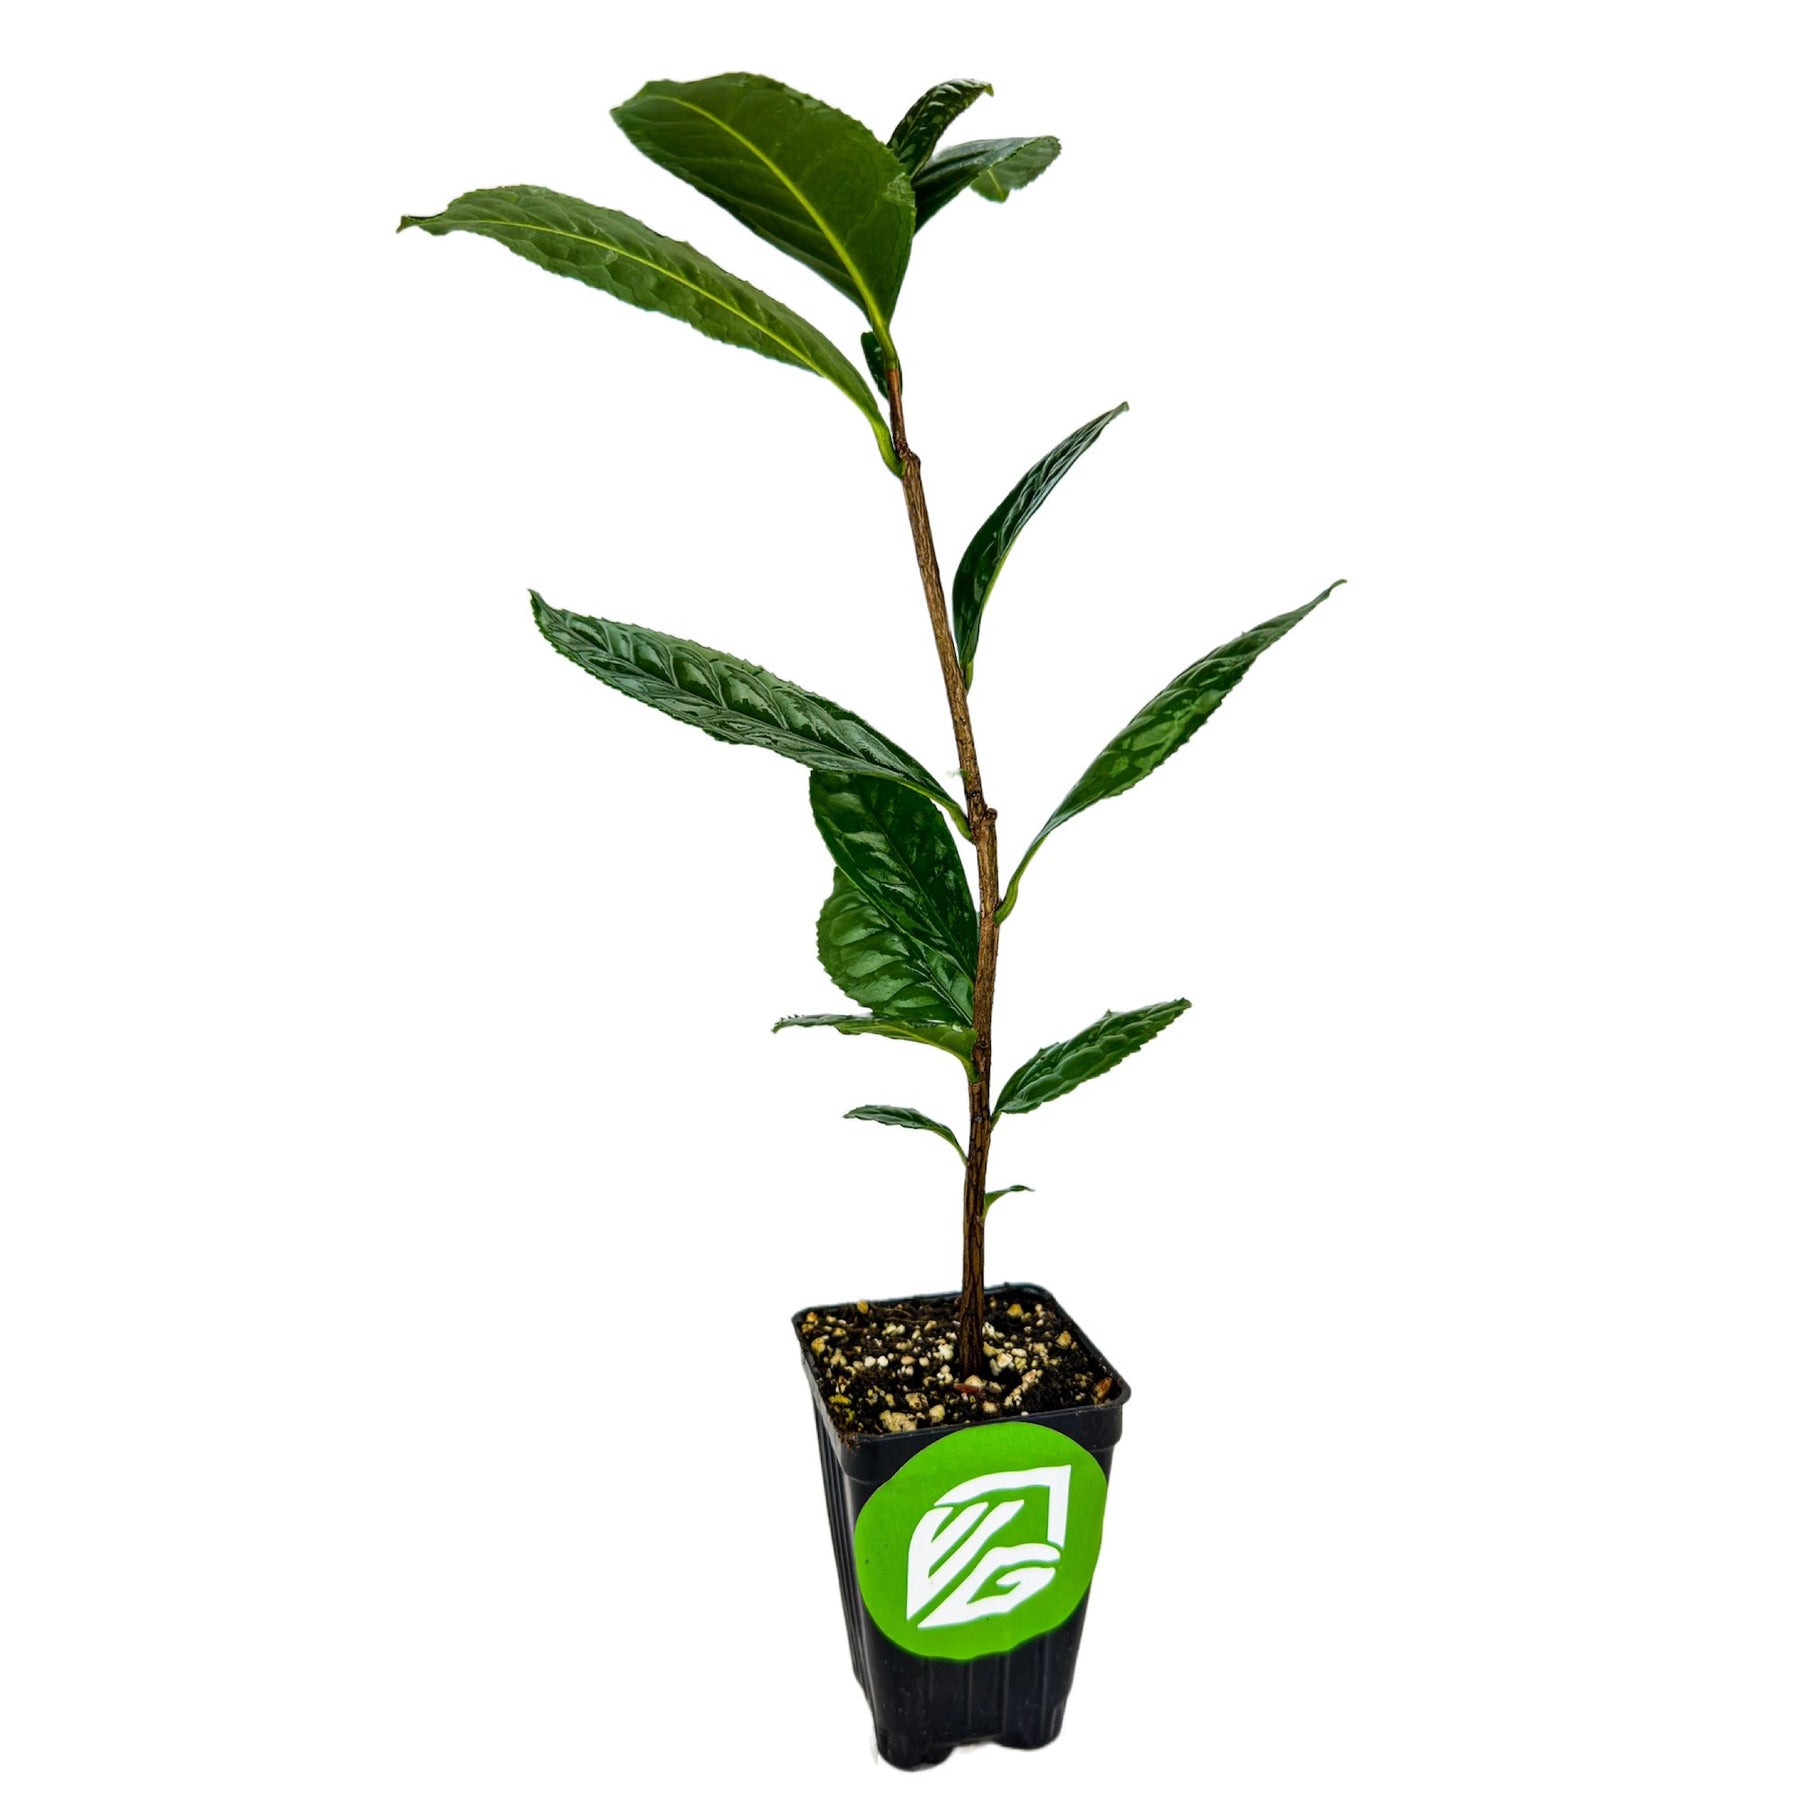 Container Grown Tea Tree Care: Growing A Tea Tree In Planters